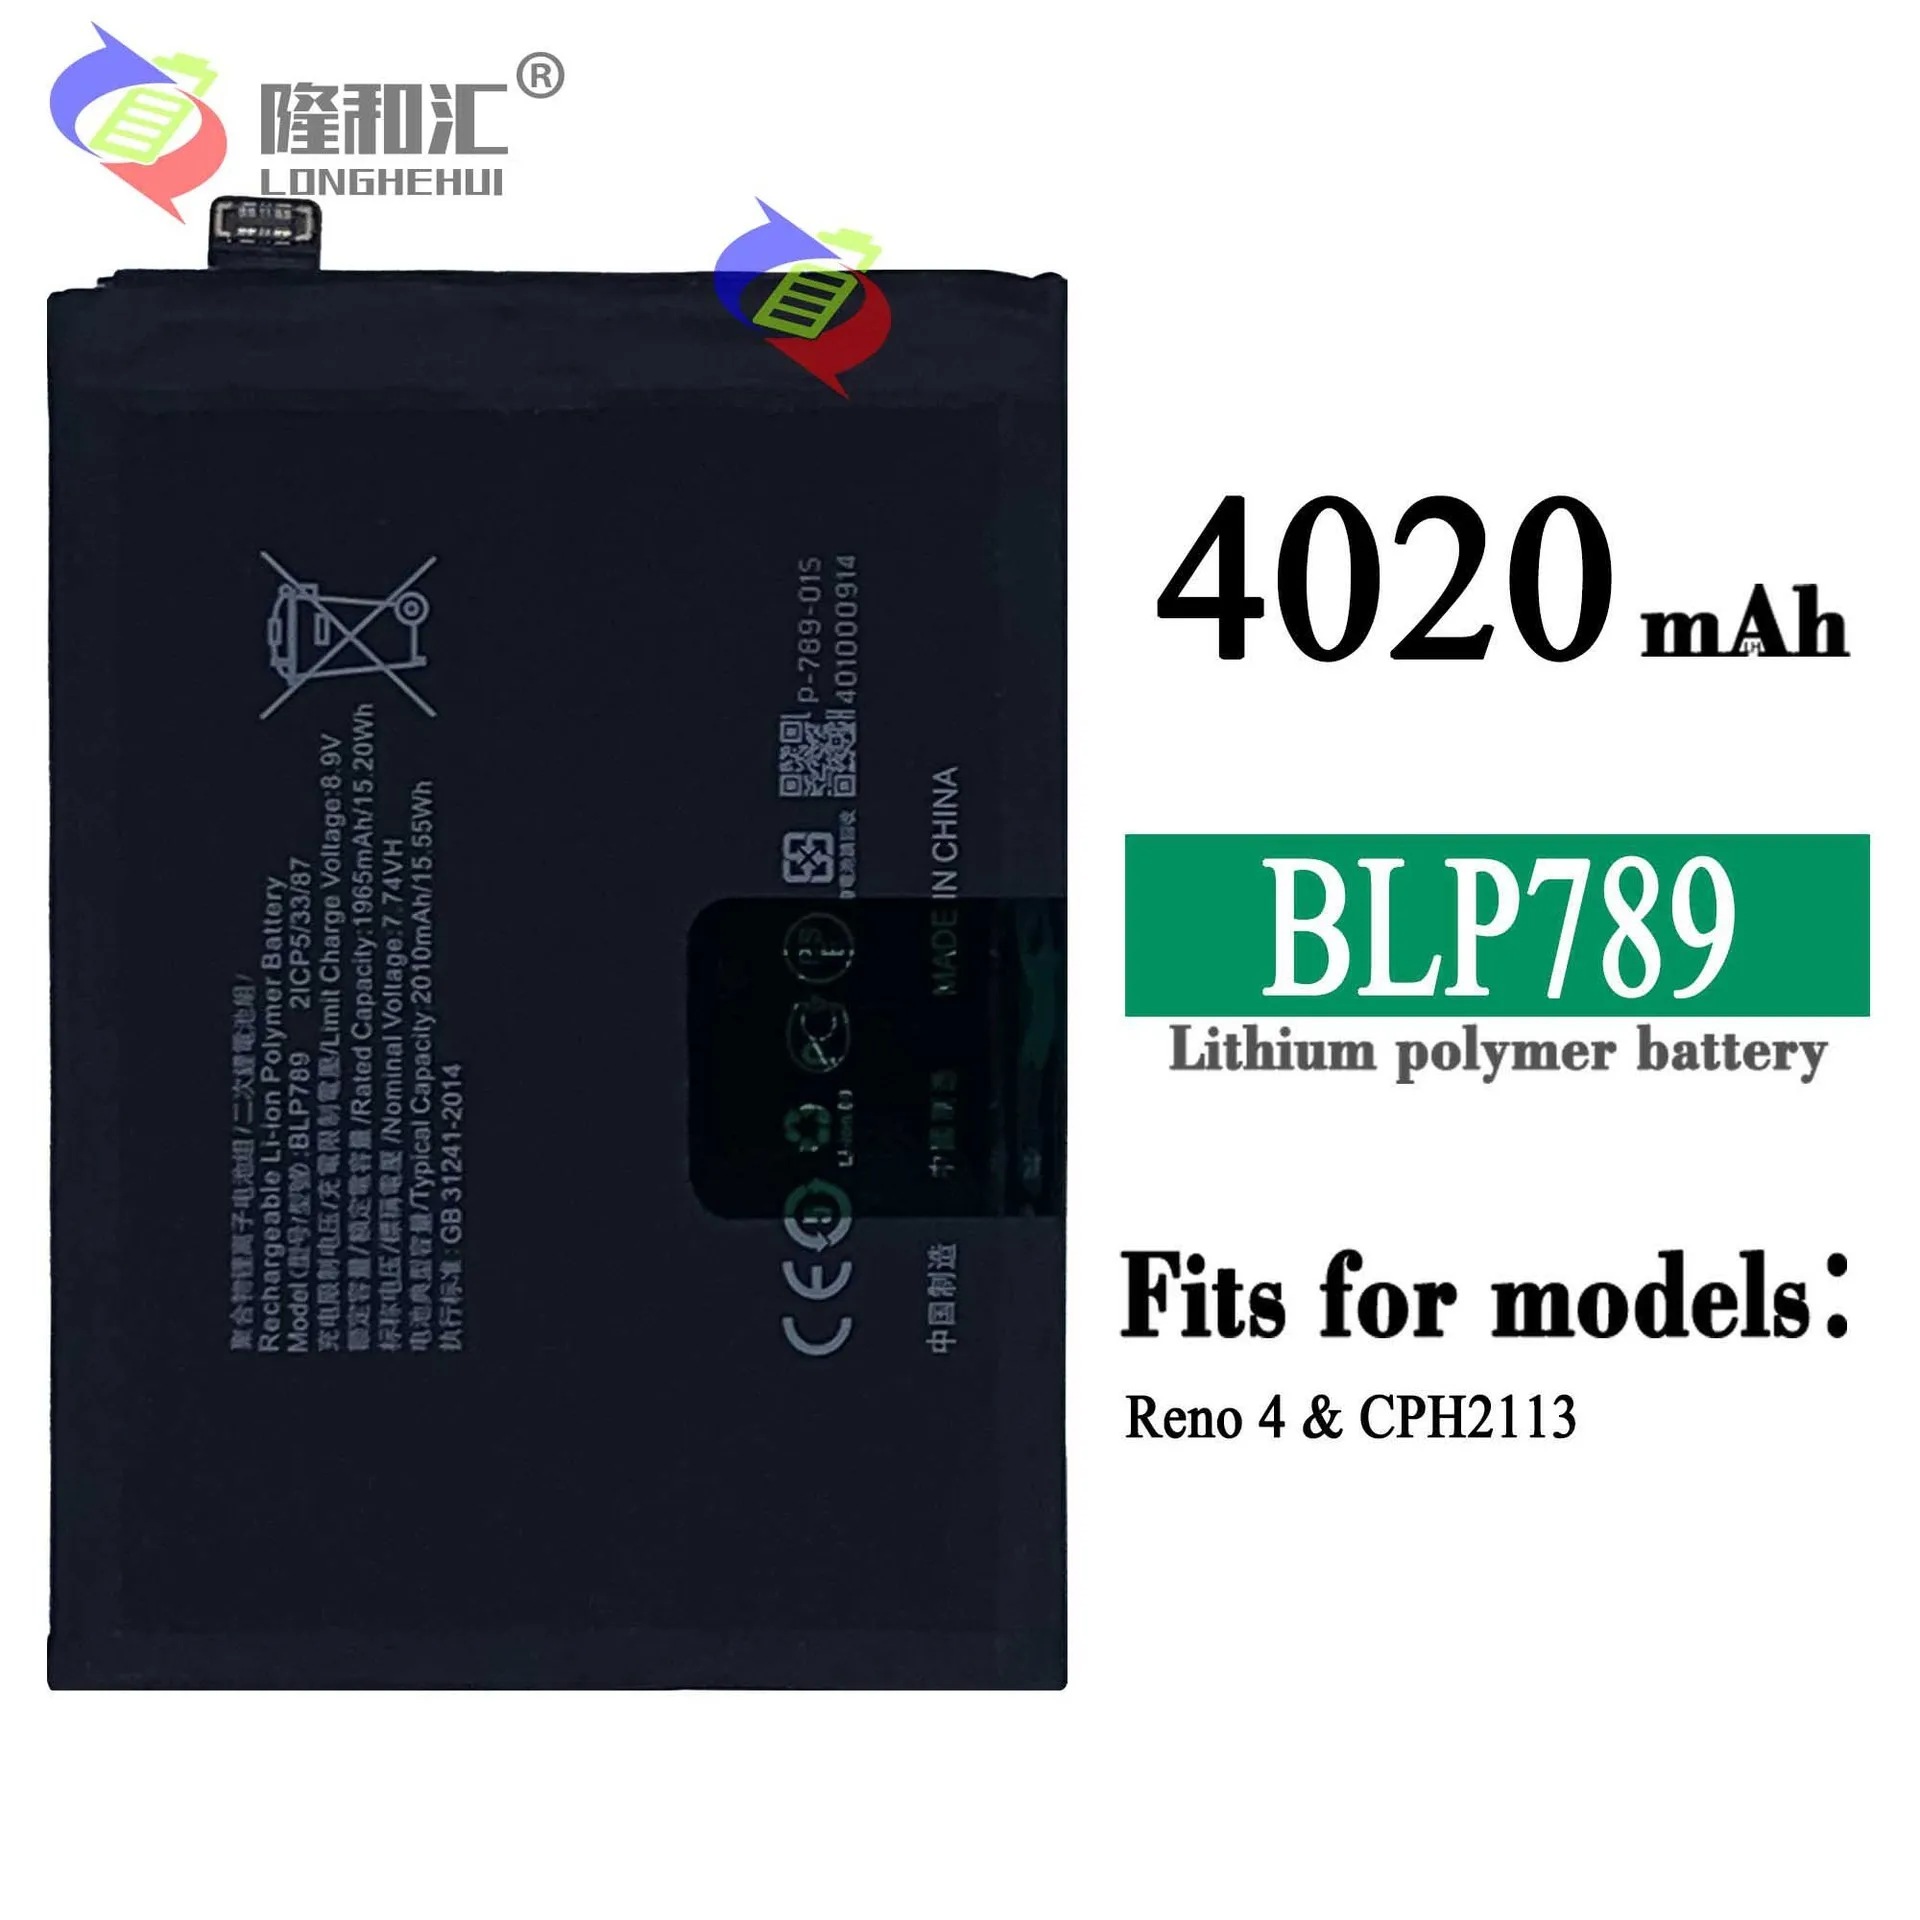 Enlarge Compatible For OPPO / Reno 4 BLP789 4020mAh Phone Battery Series